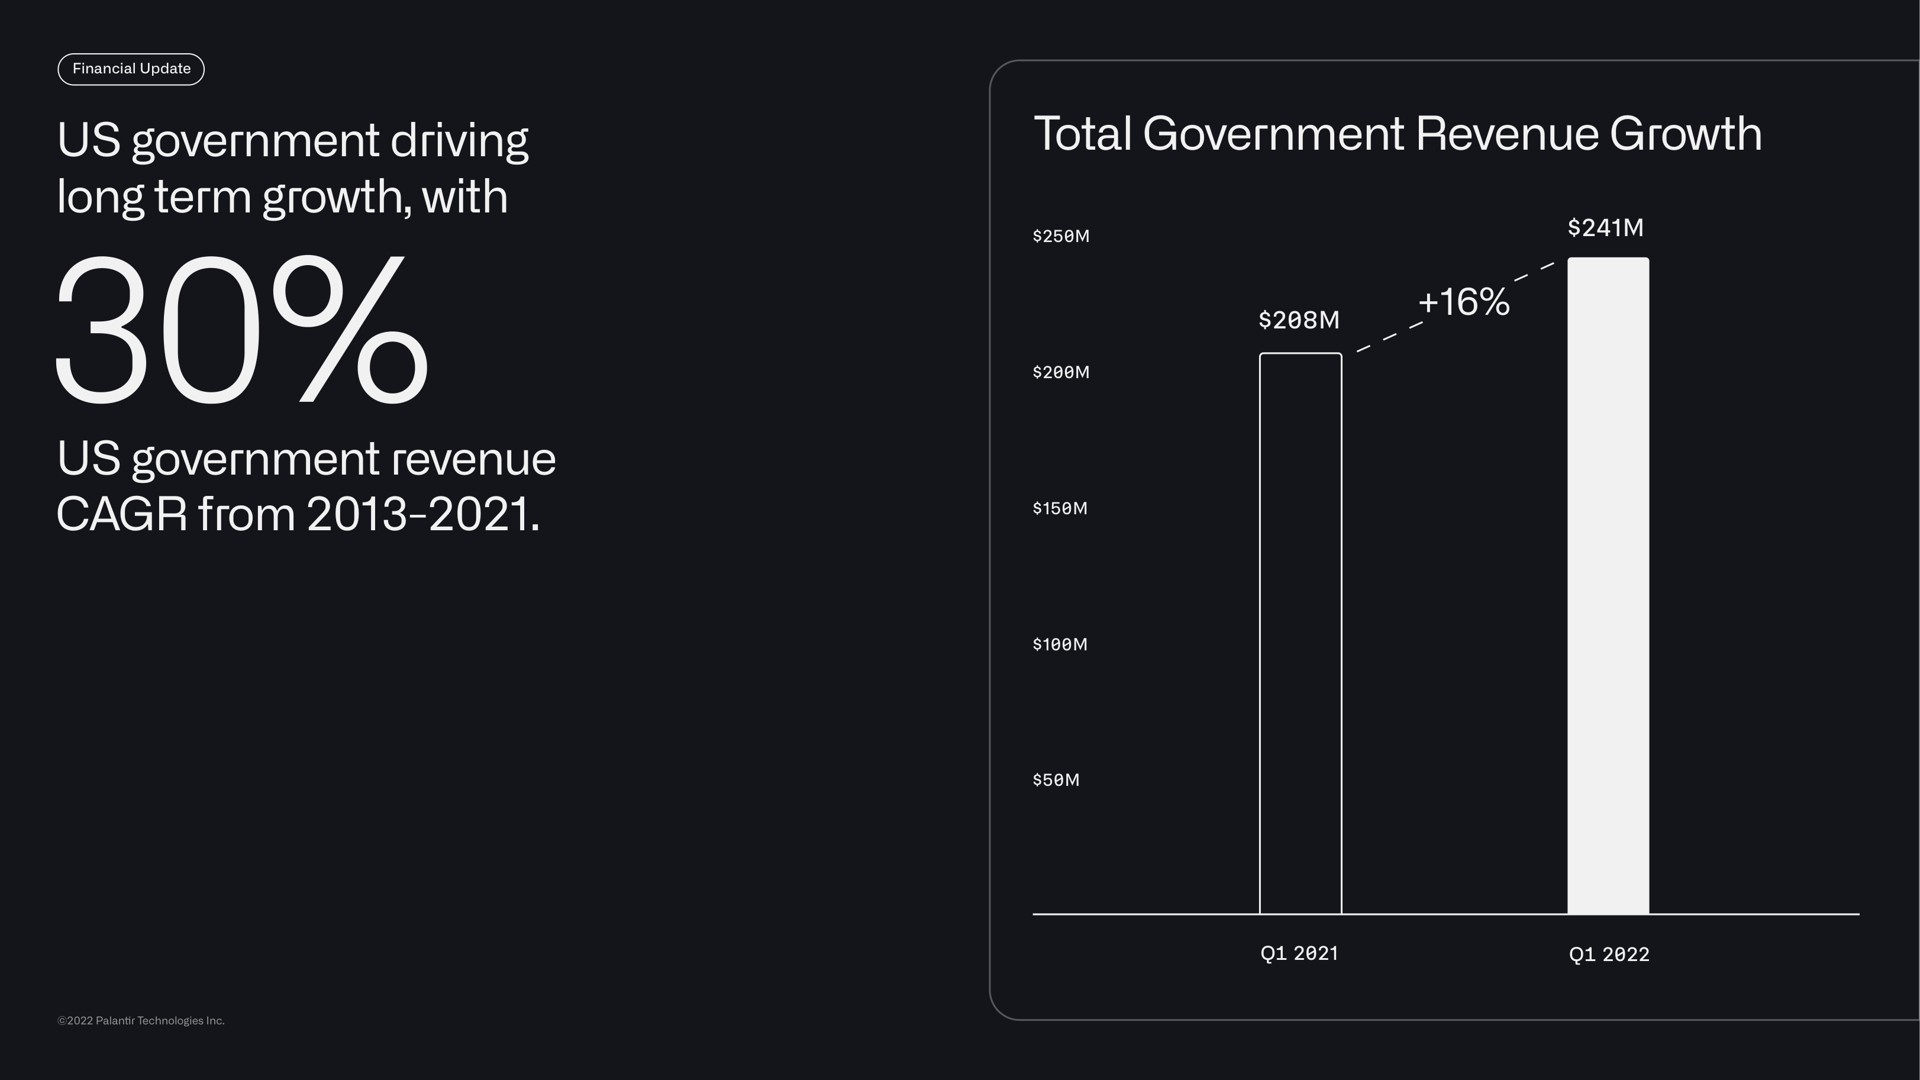 us government driving long term growth with us government revenue from total government revenue growth ore | Palantir